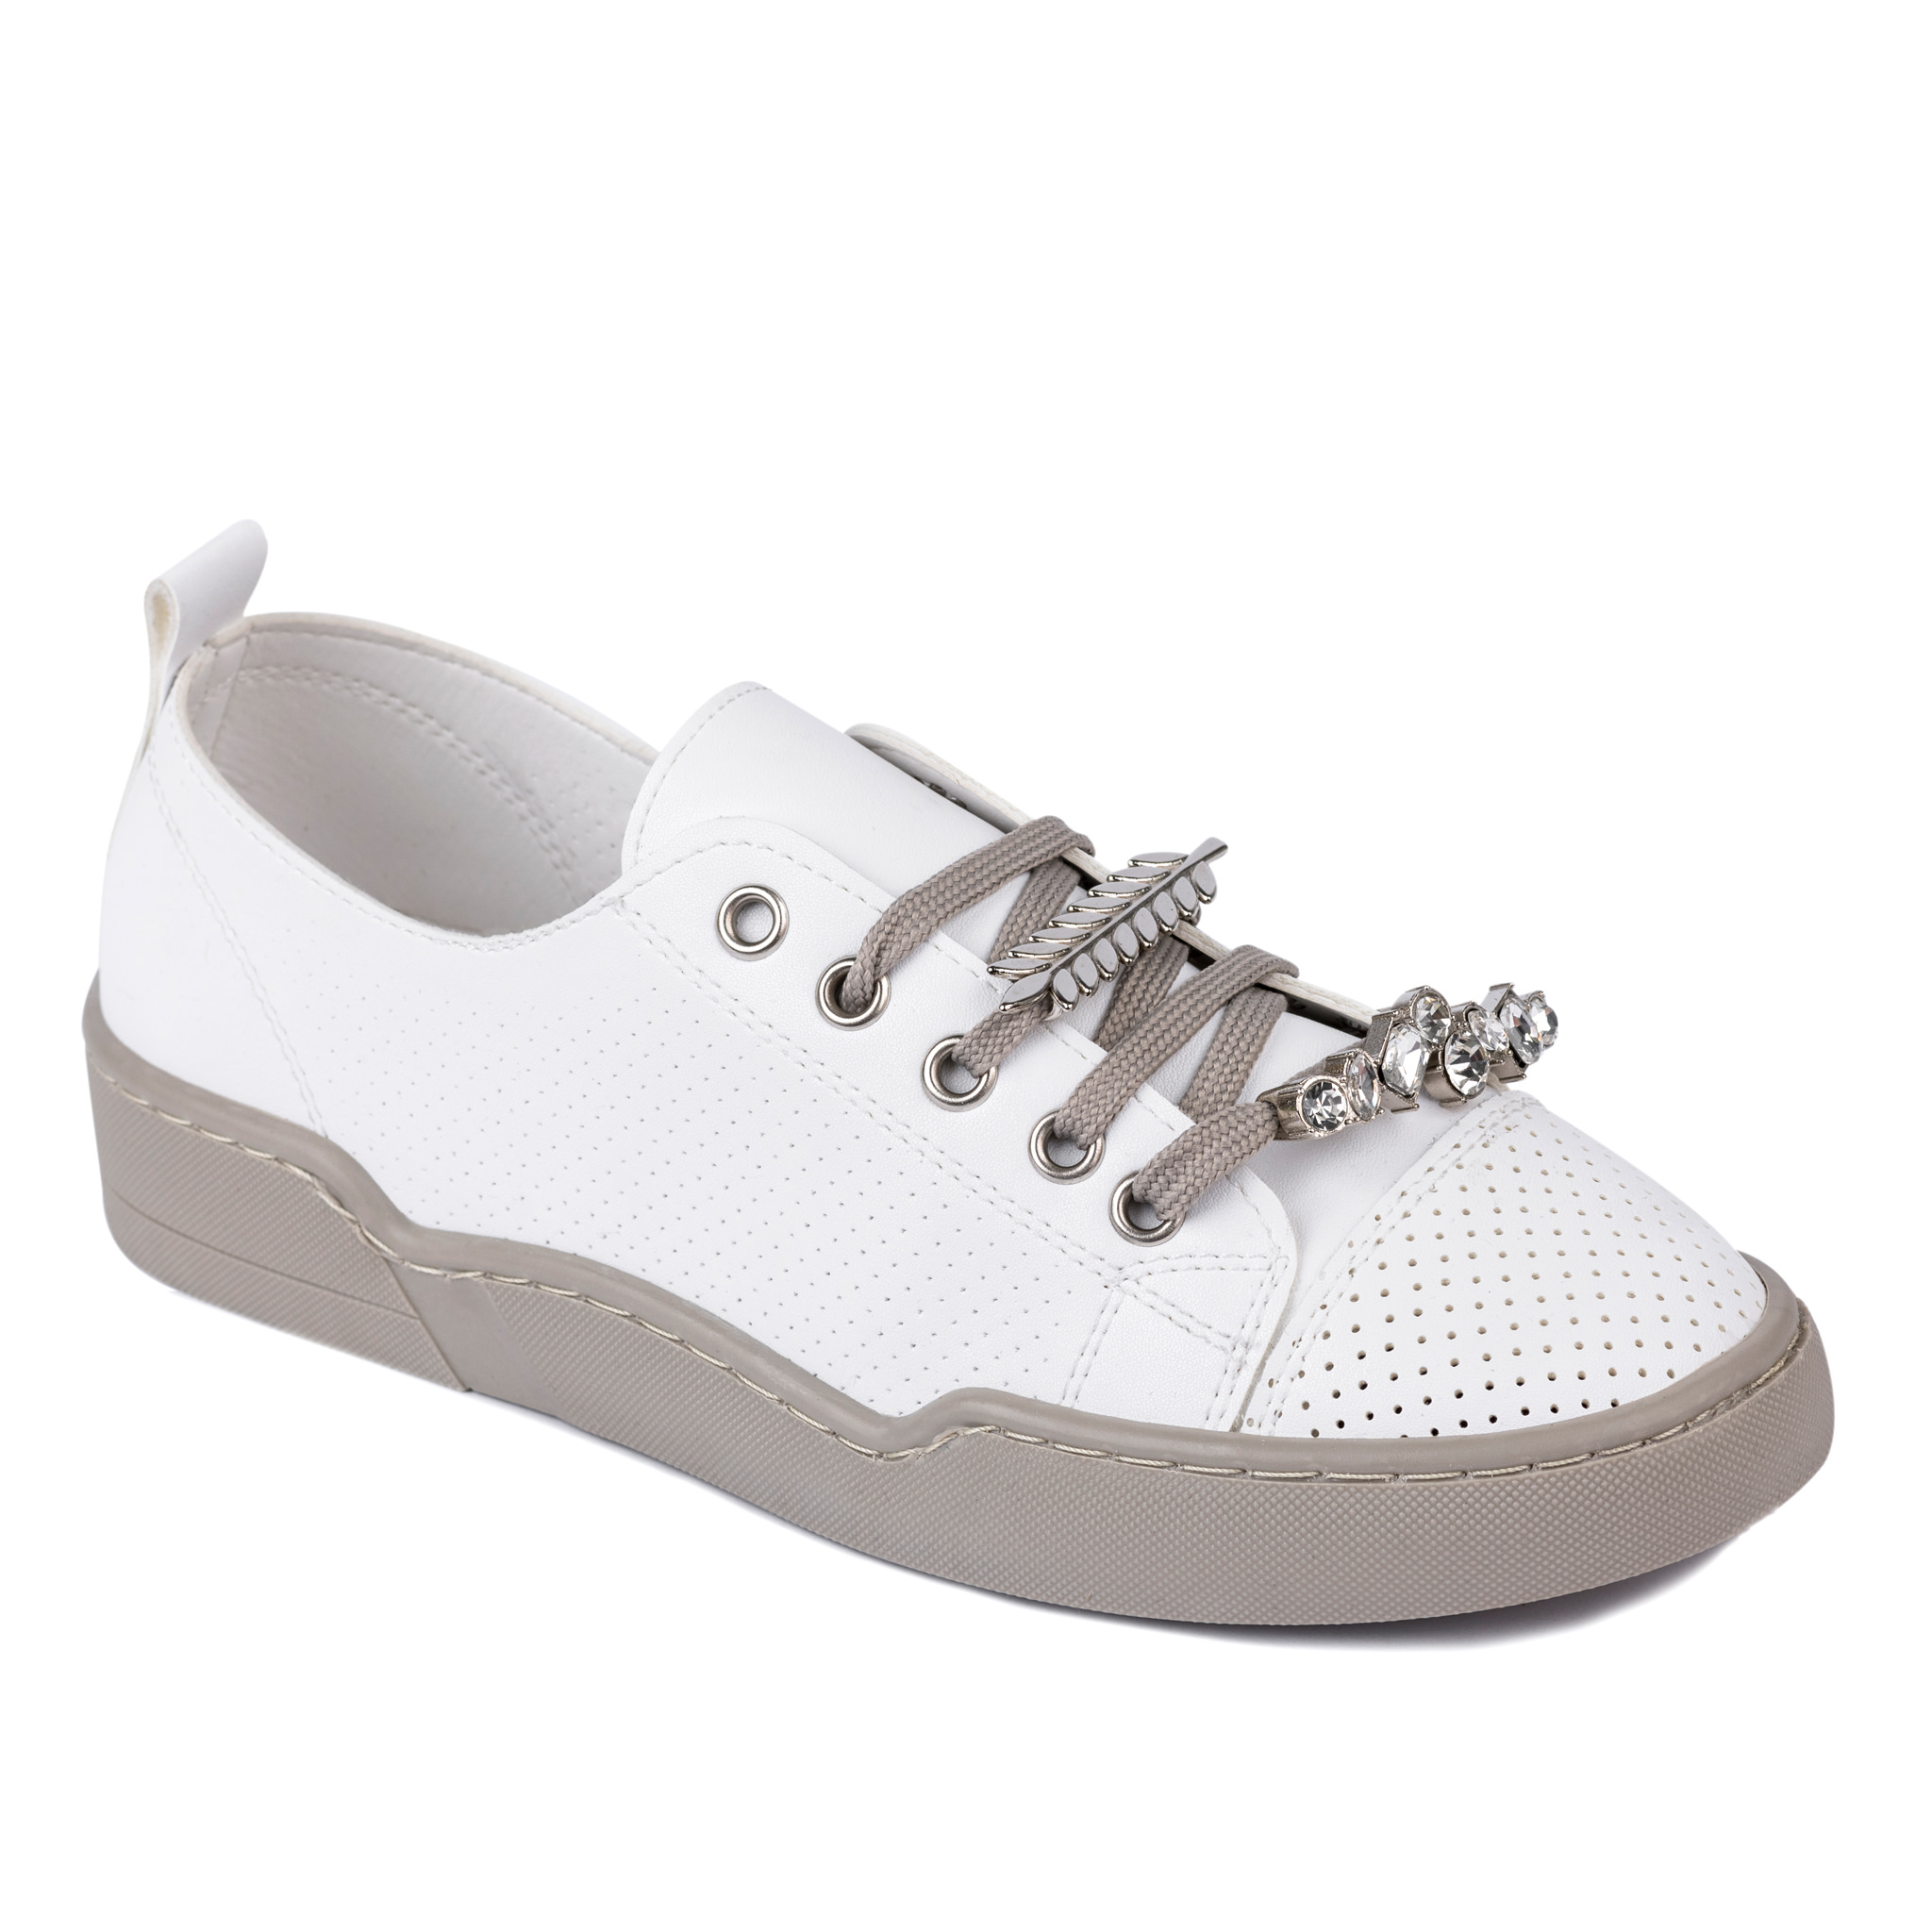 SHALLOW SNEAKERS WITH ORNAMENTS - WHITE